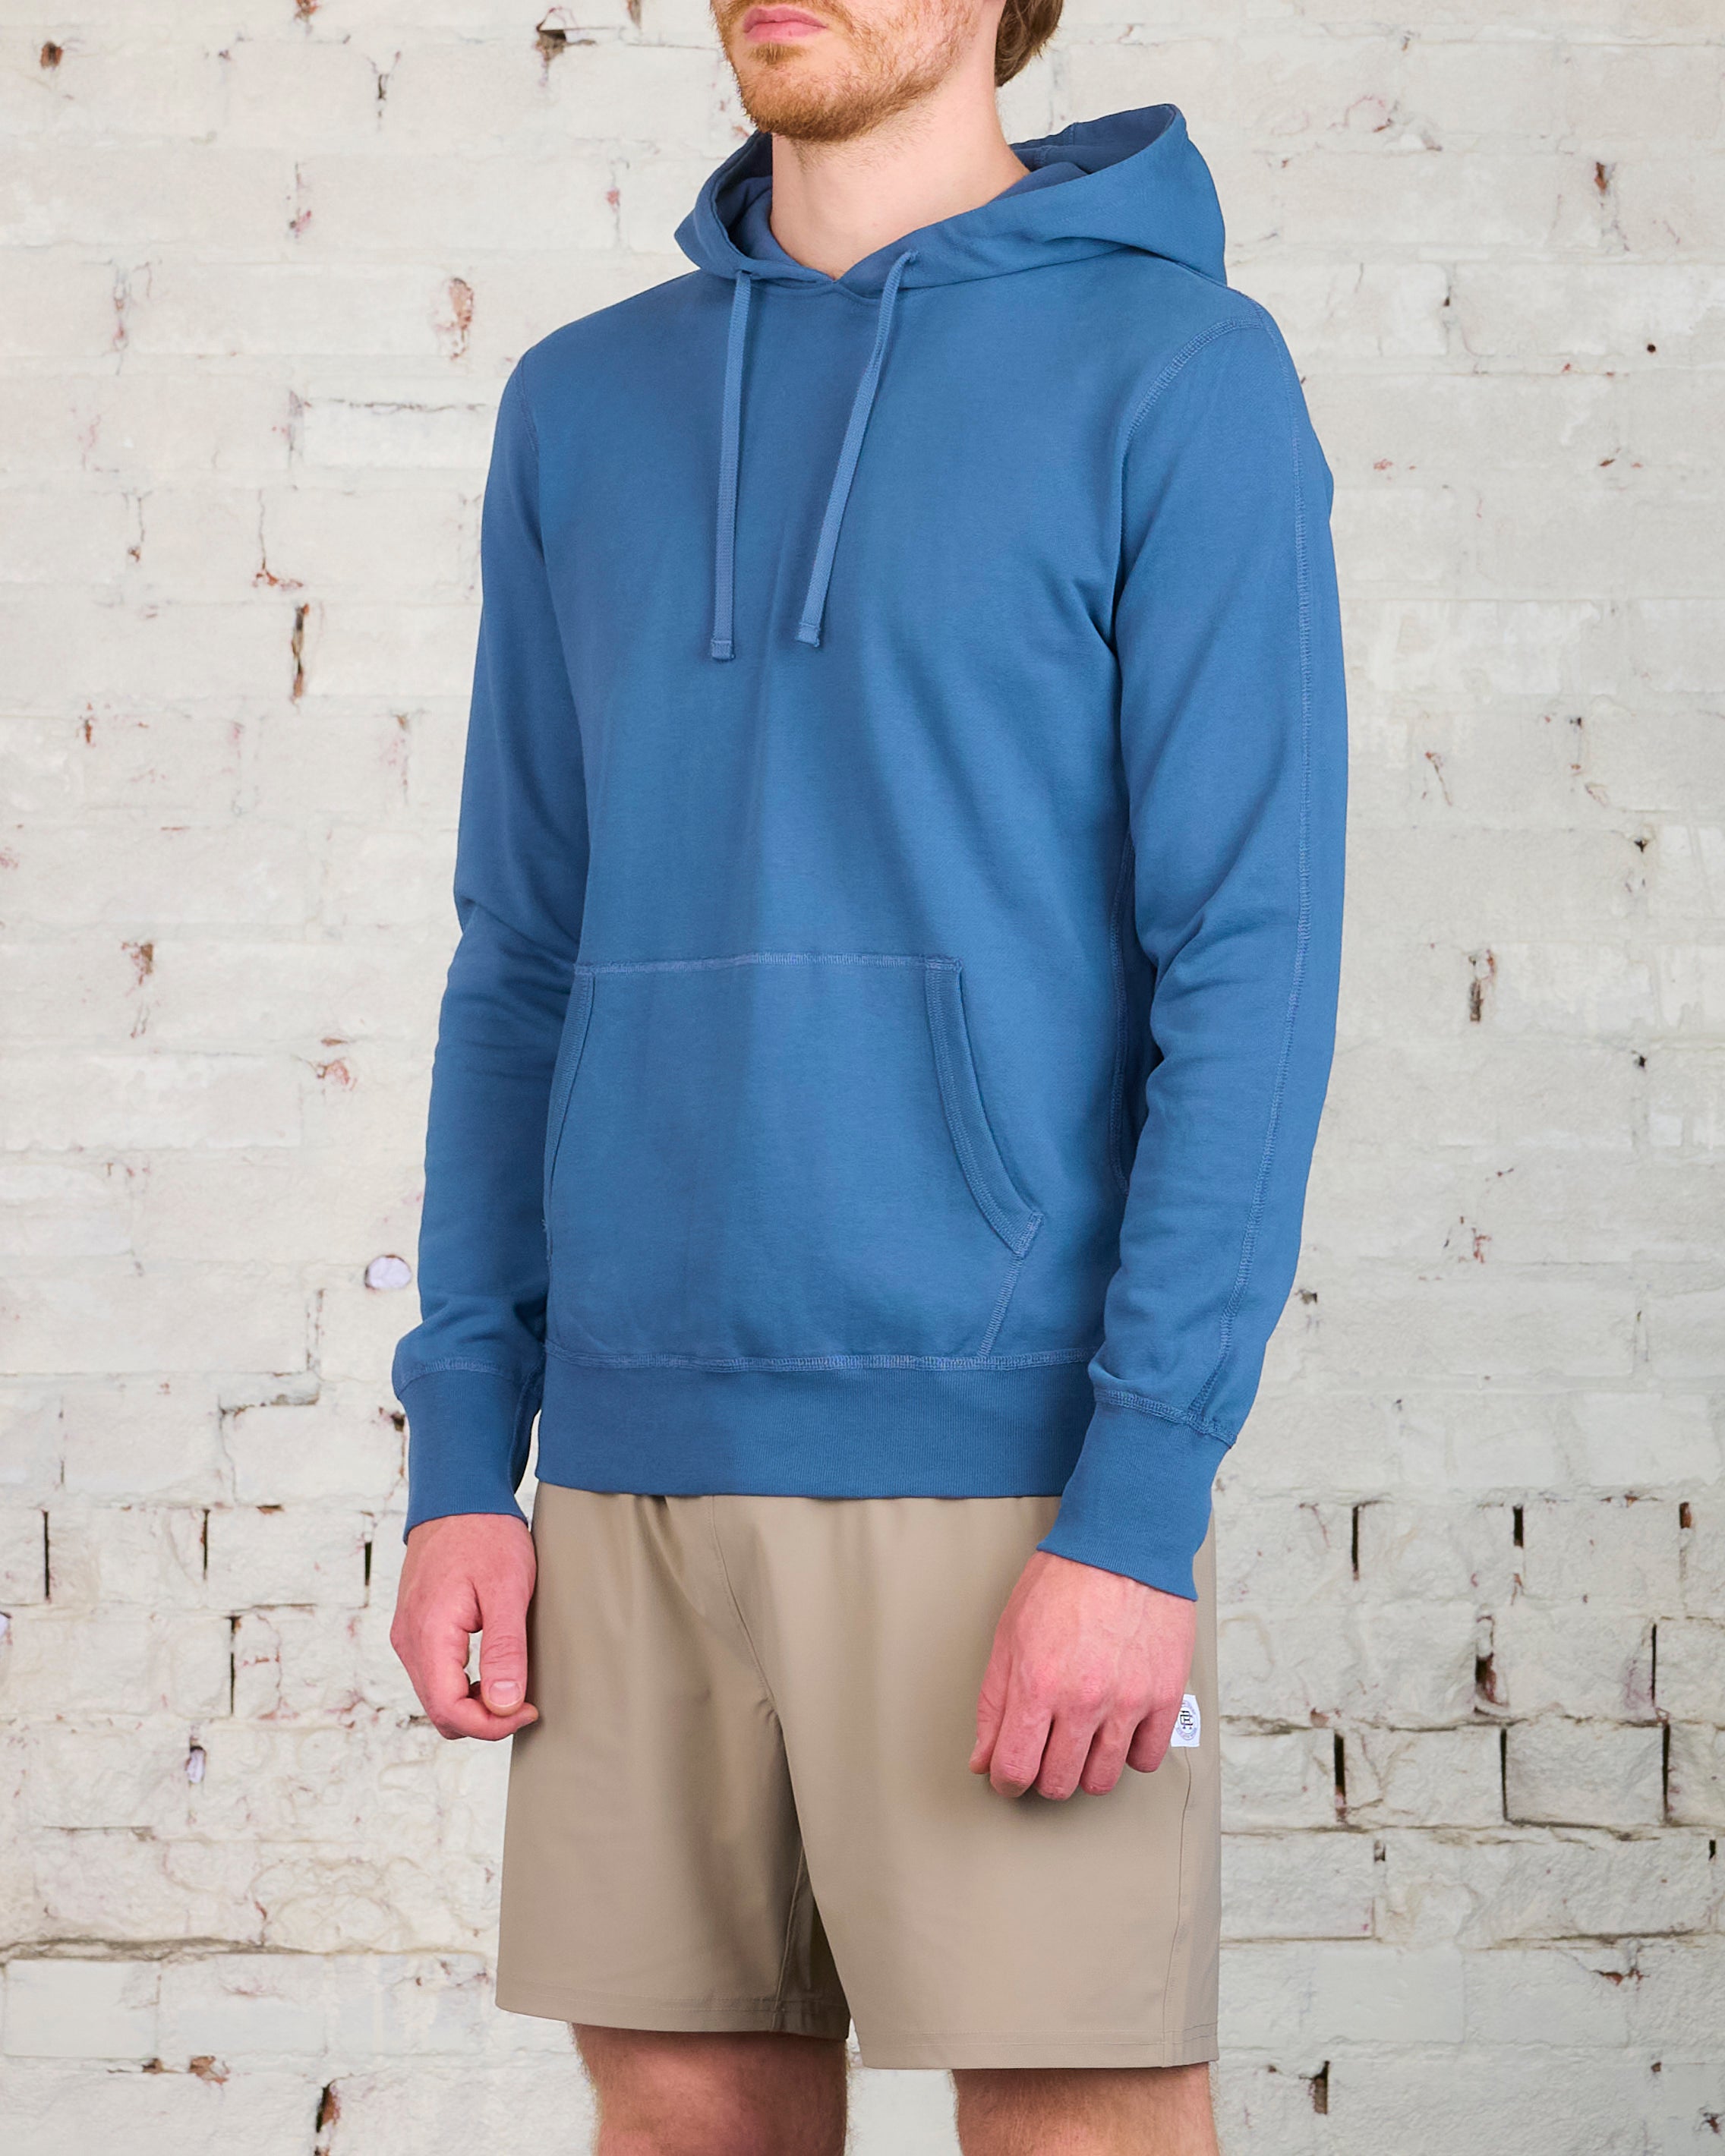 Reigning Champ Lightweight Terry Hooded Sweatshirt Washed Blue – LESS 17